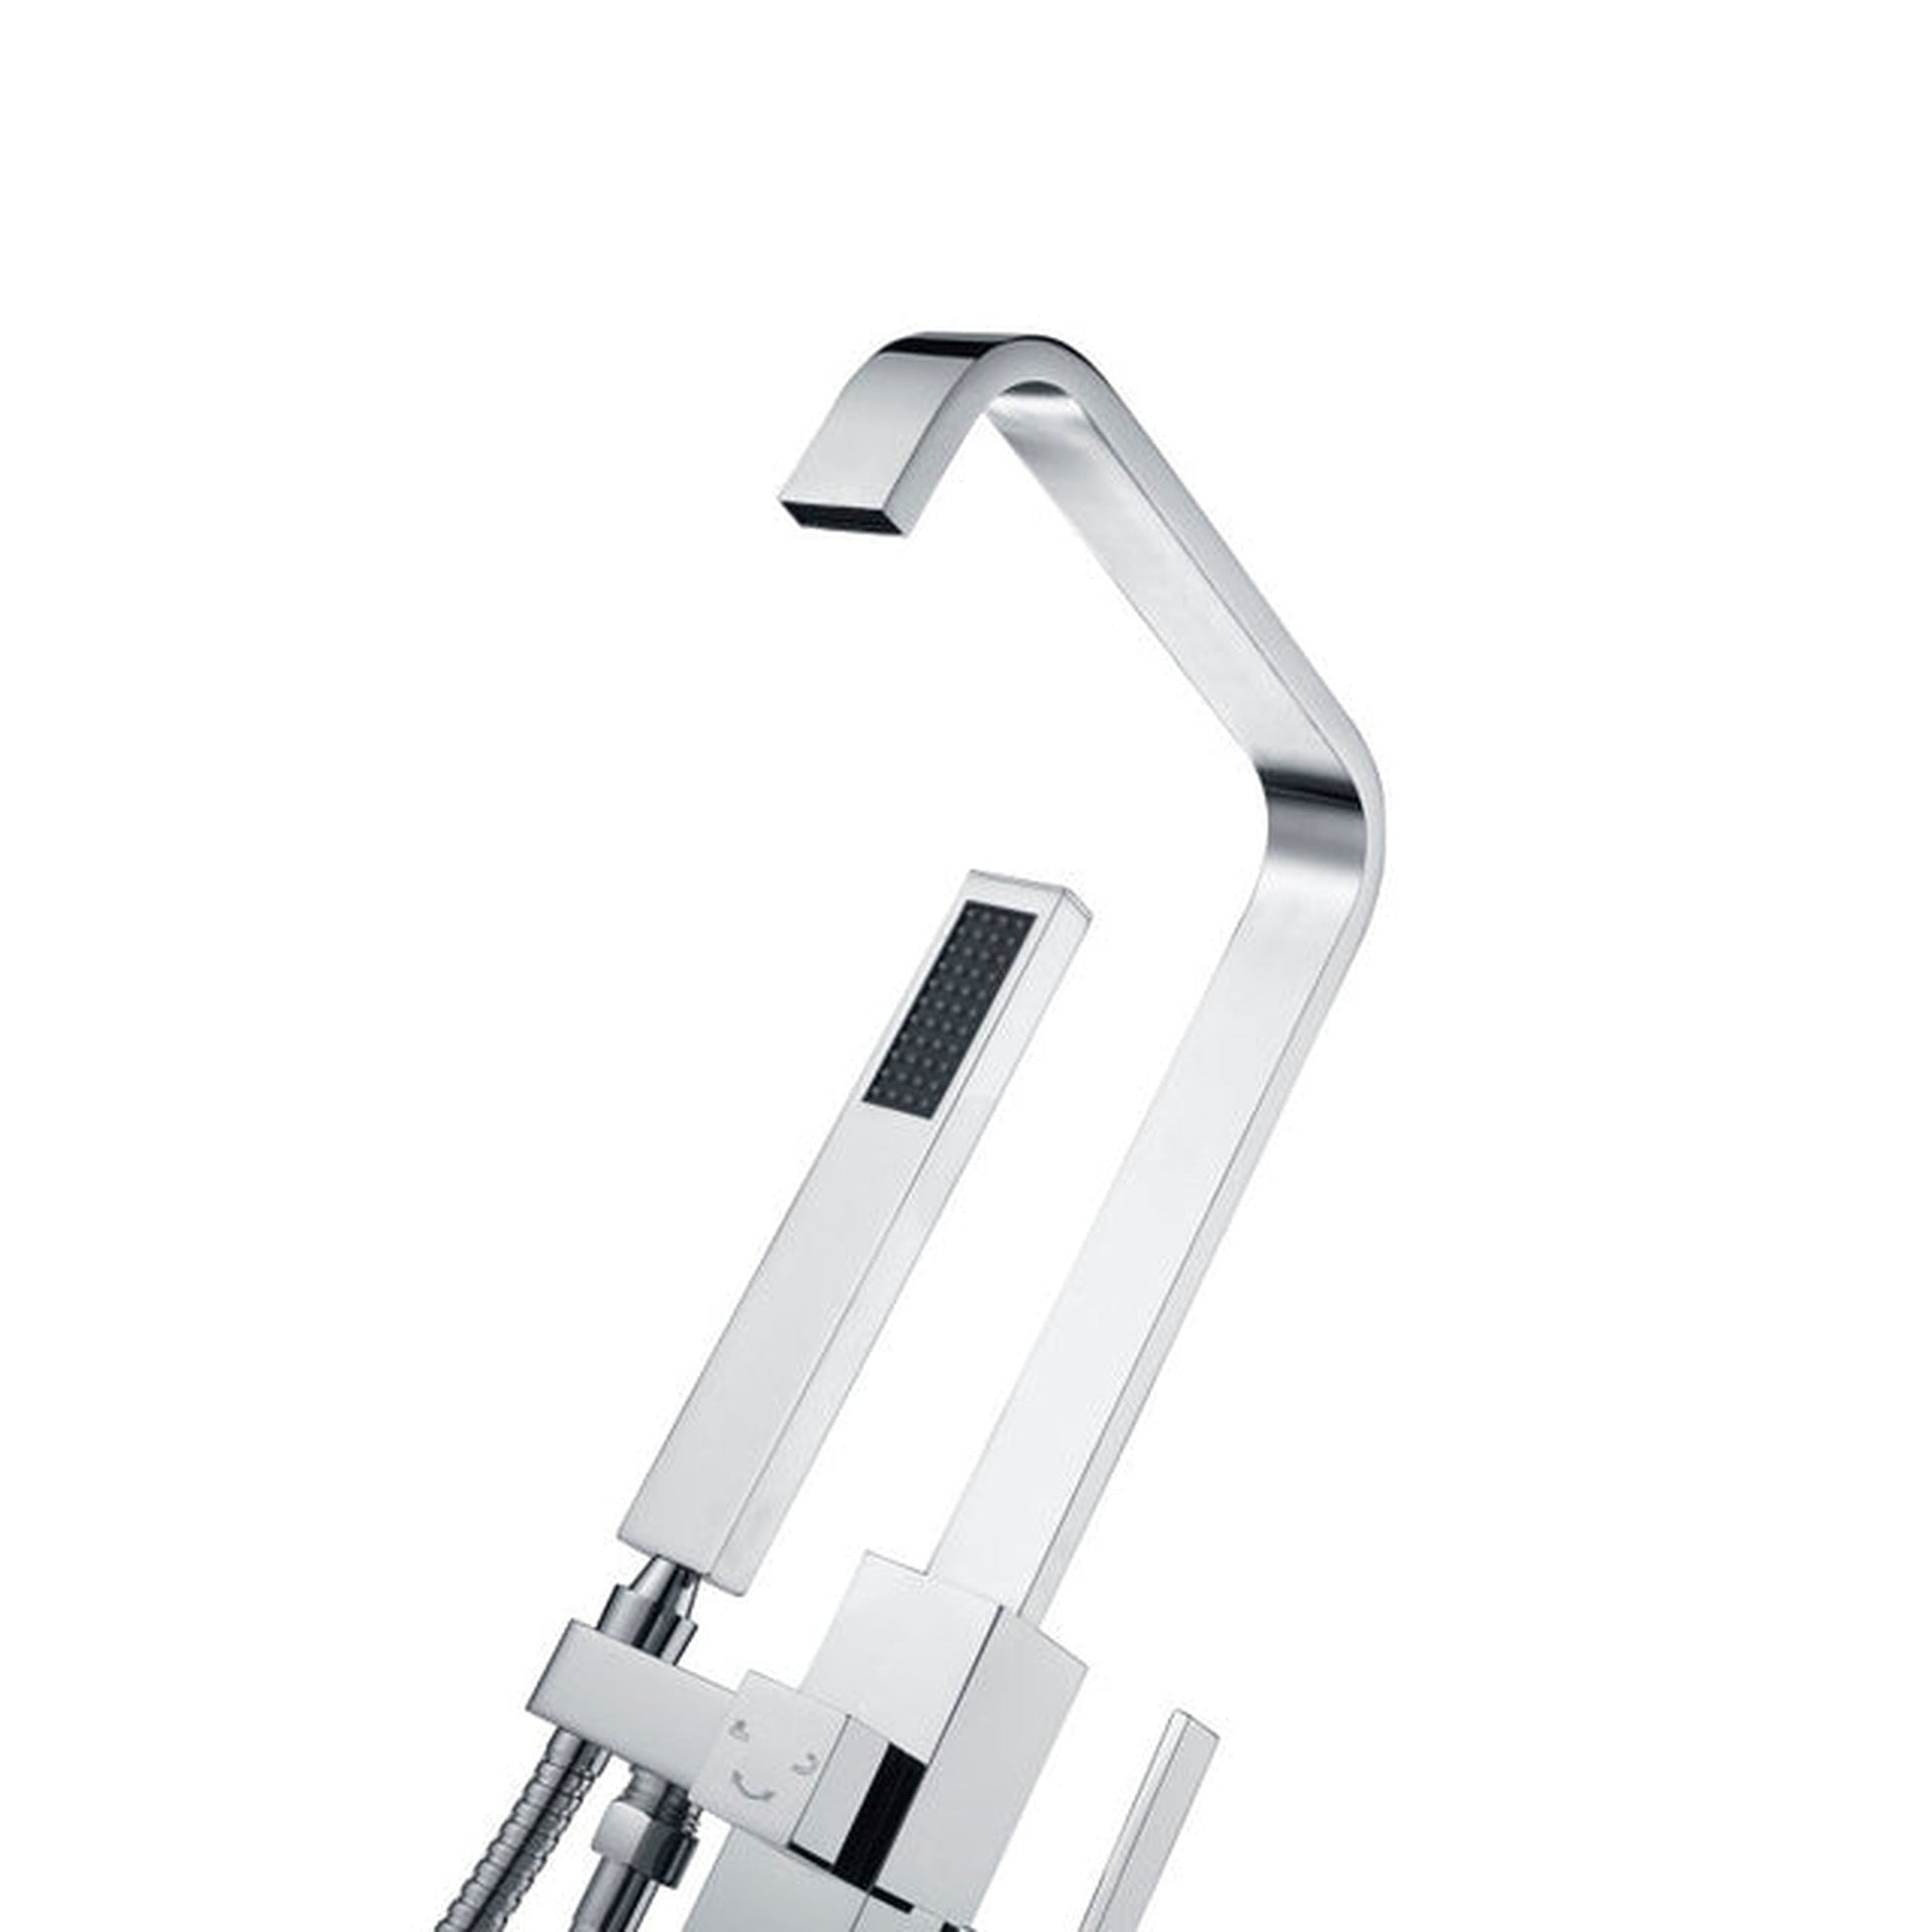 ANZZI Victoria Series 2-Handle Polished Chrome Clawfoot Tub Faucet With Euro-Grip Handheld Sprayer